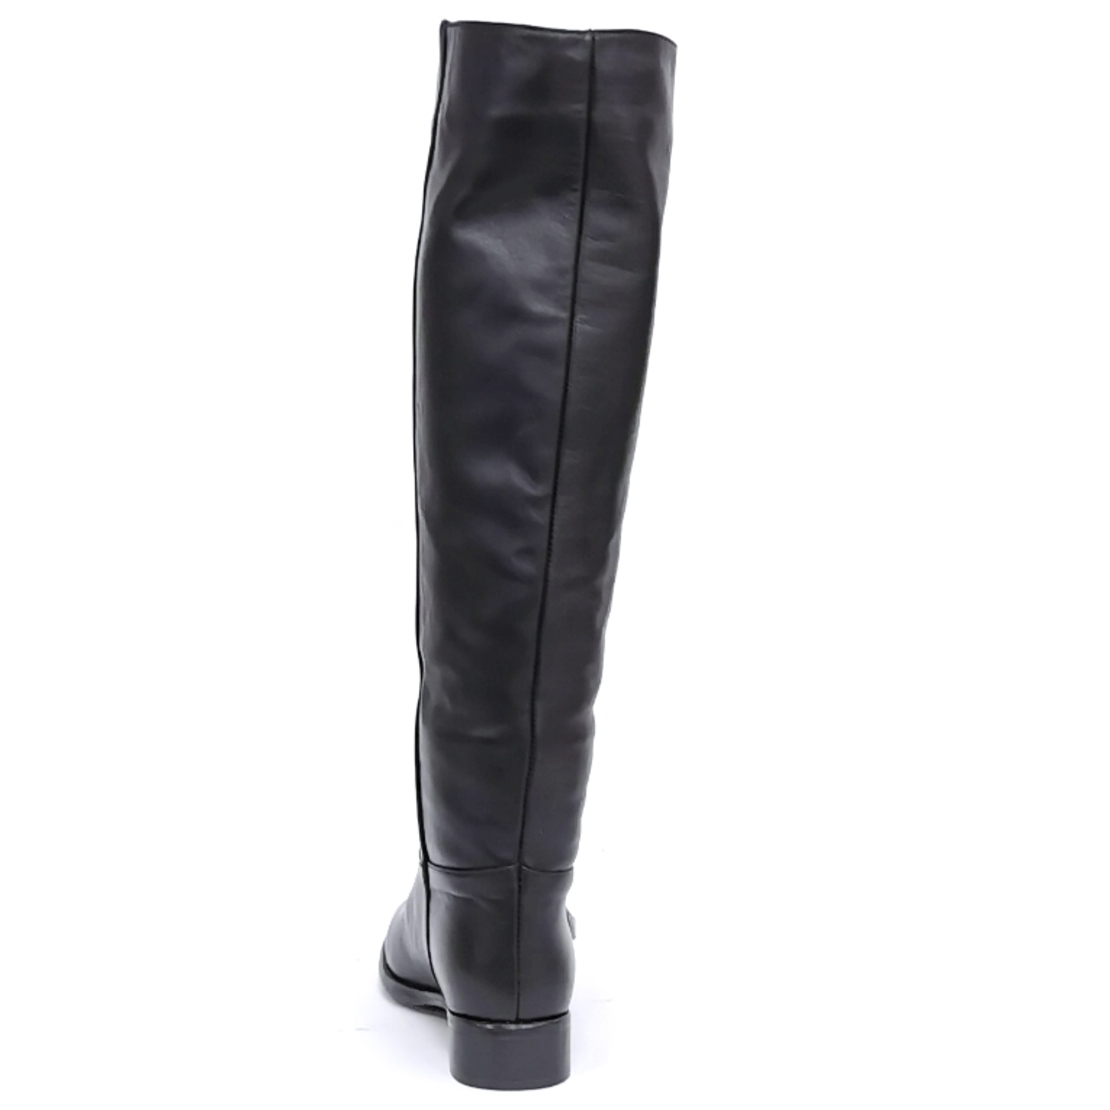 Women's casual boots made of natural leather in black/7400178